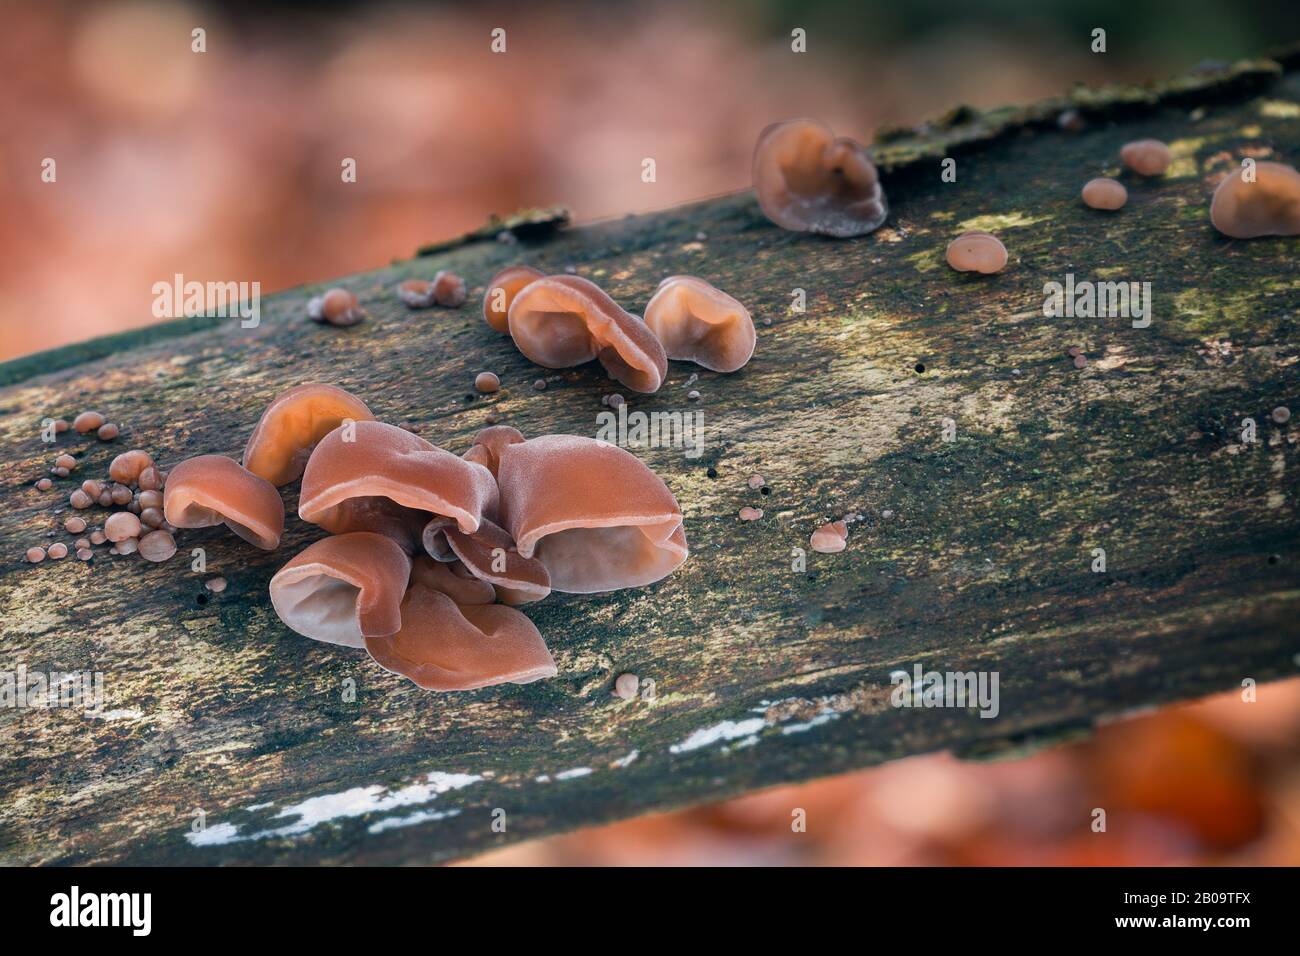 A tasty and healthy mushroom that grows on tree trunks. Seasonal delicacy. Stock Photo